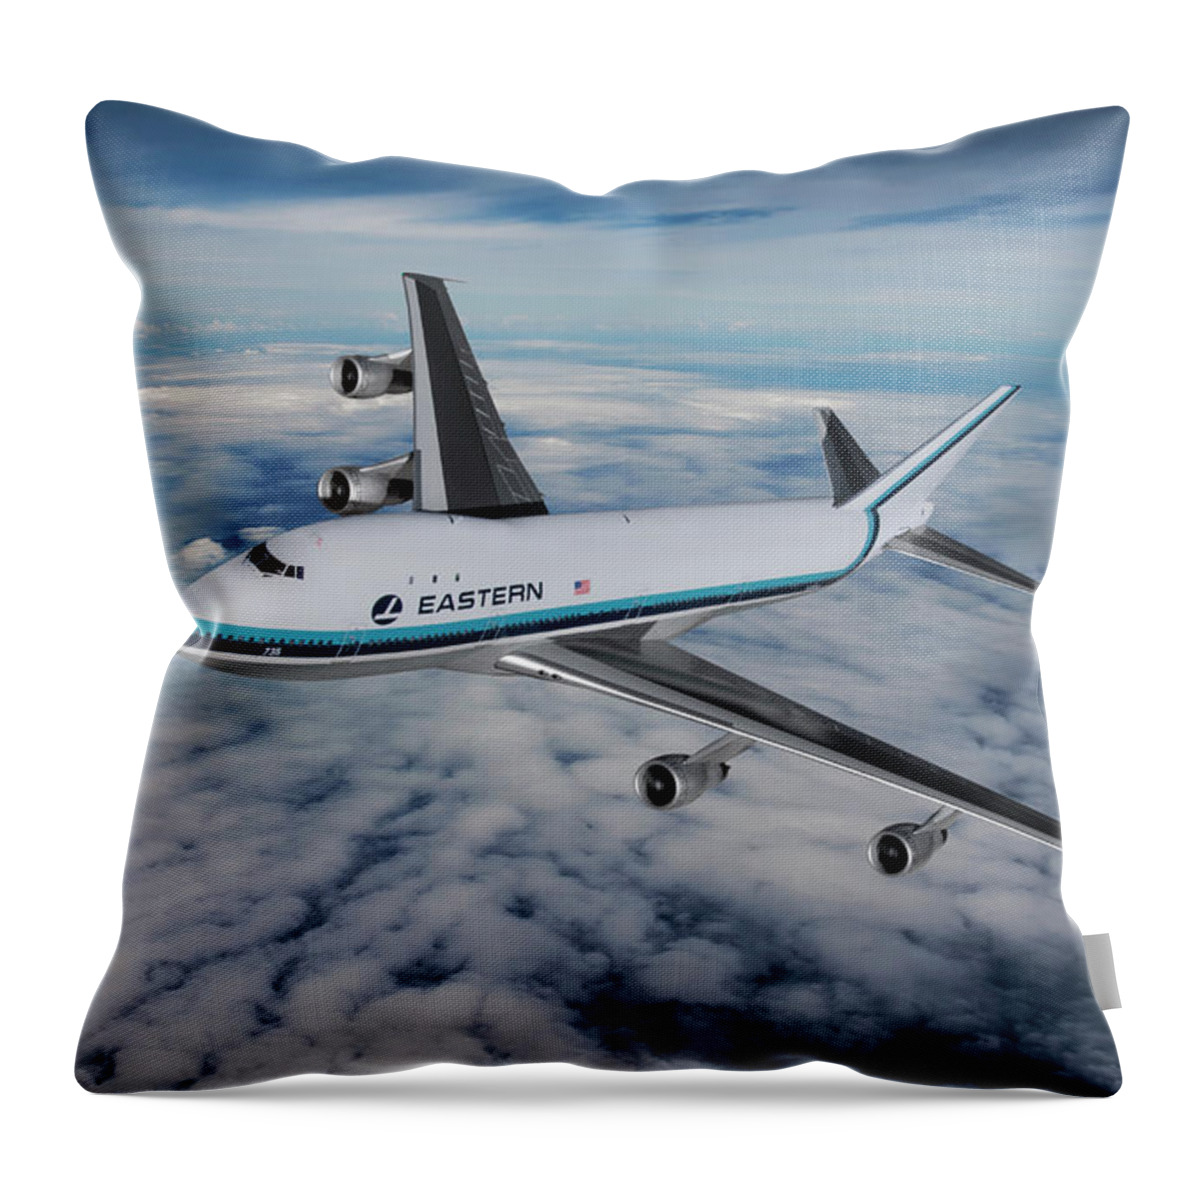 Eastern Airlines Throw Pillow featuring the digital art Eastern Airlines Boeing 747-121 by Erik Simonsen